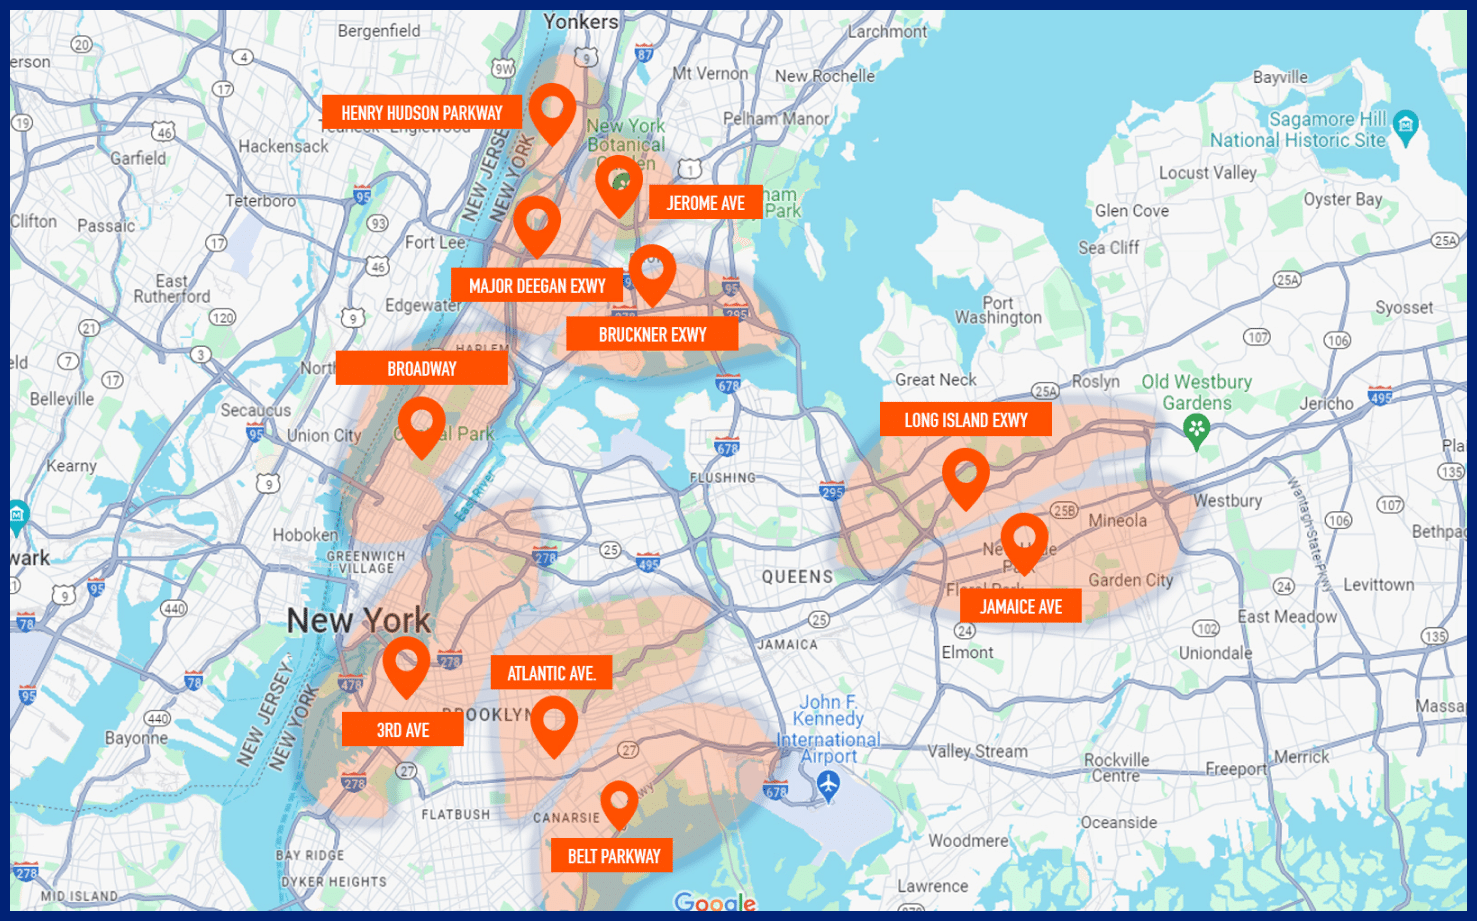 Map showing hotspots of top NYC Hotspots for Traffic Collisions